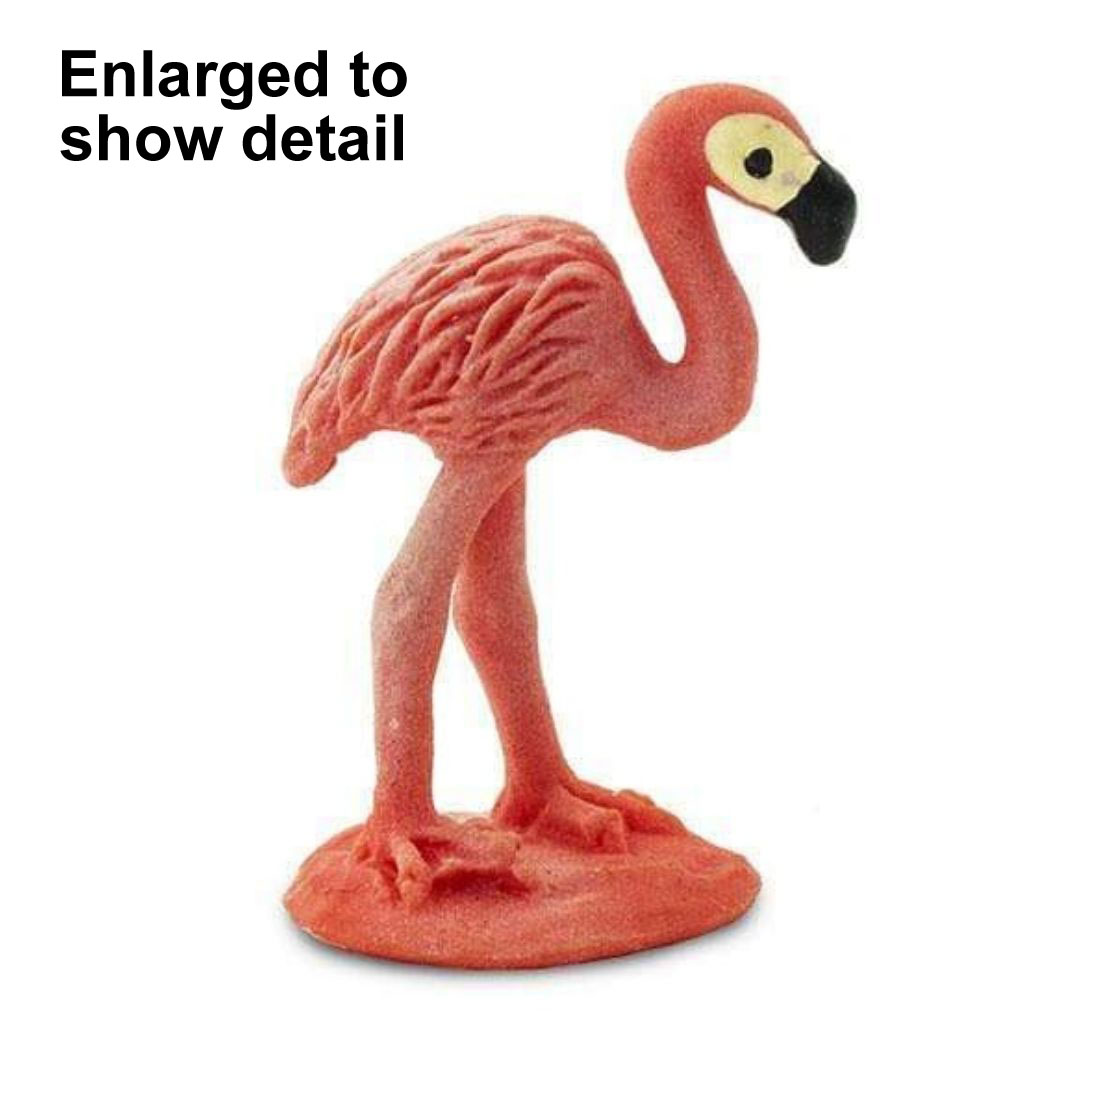 Flamingo Mini Figurine with the text Enlarged to Show Detail